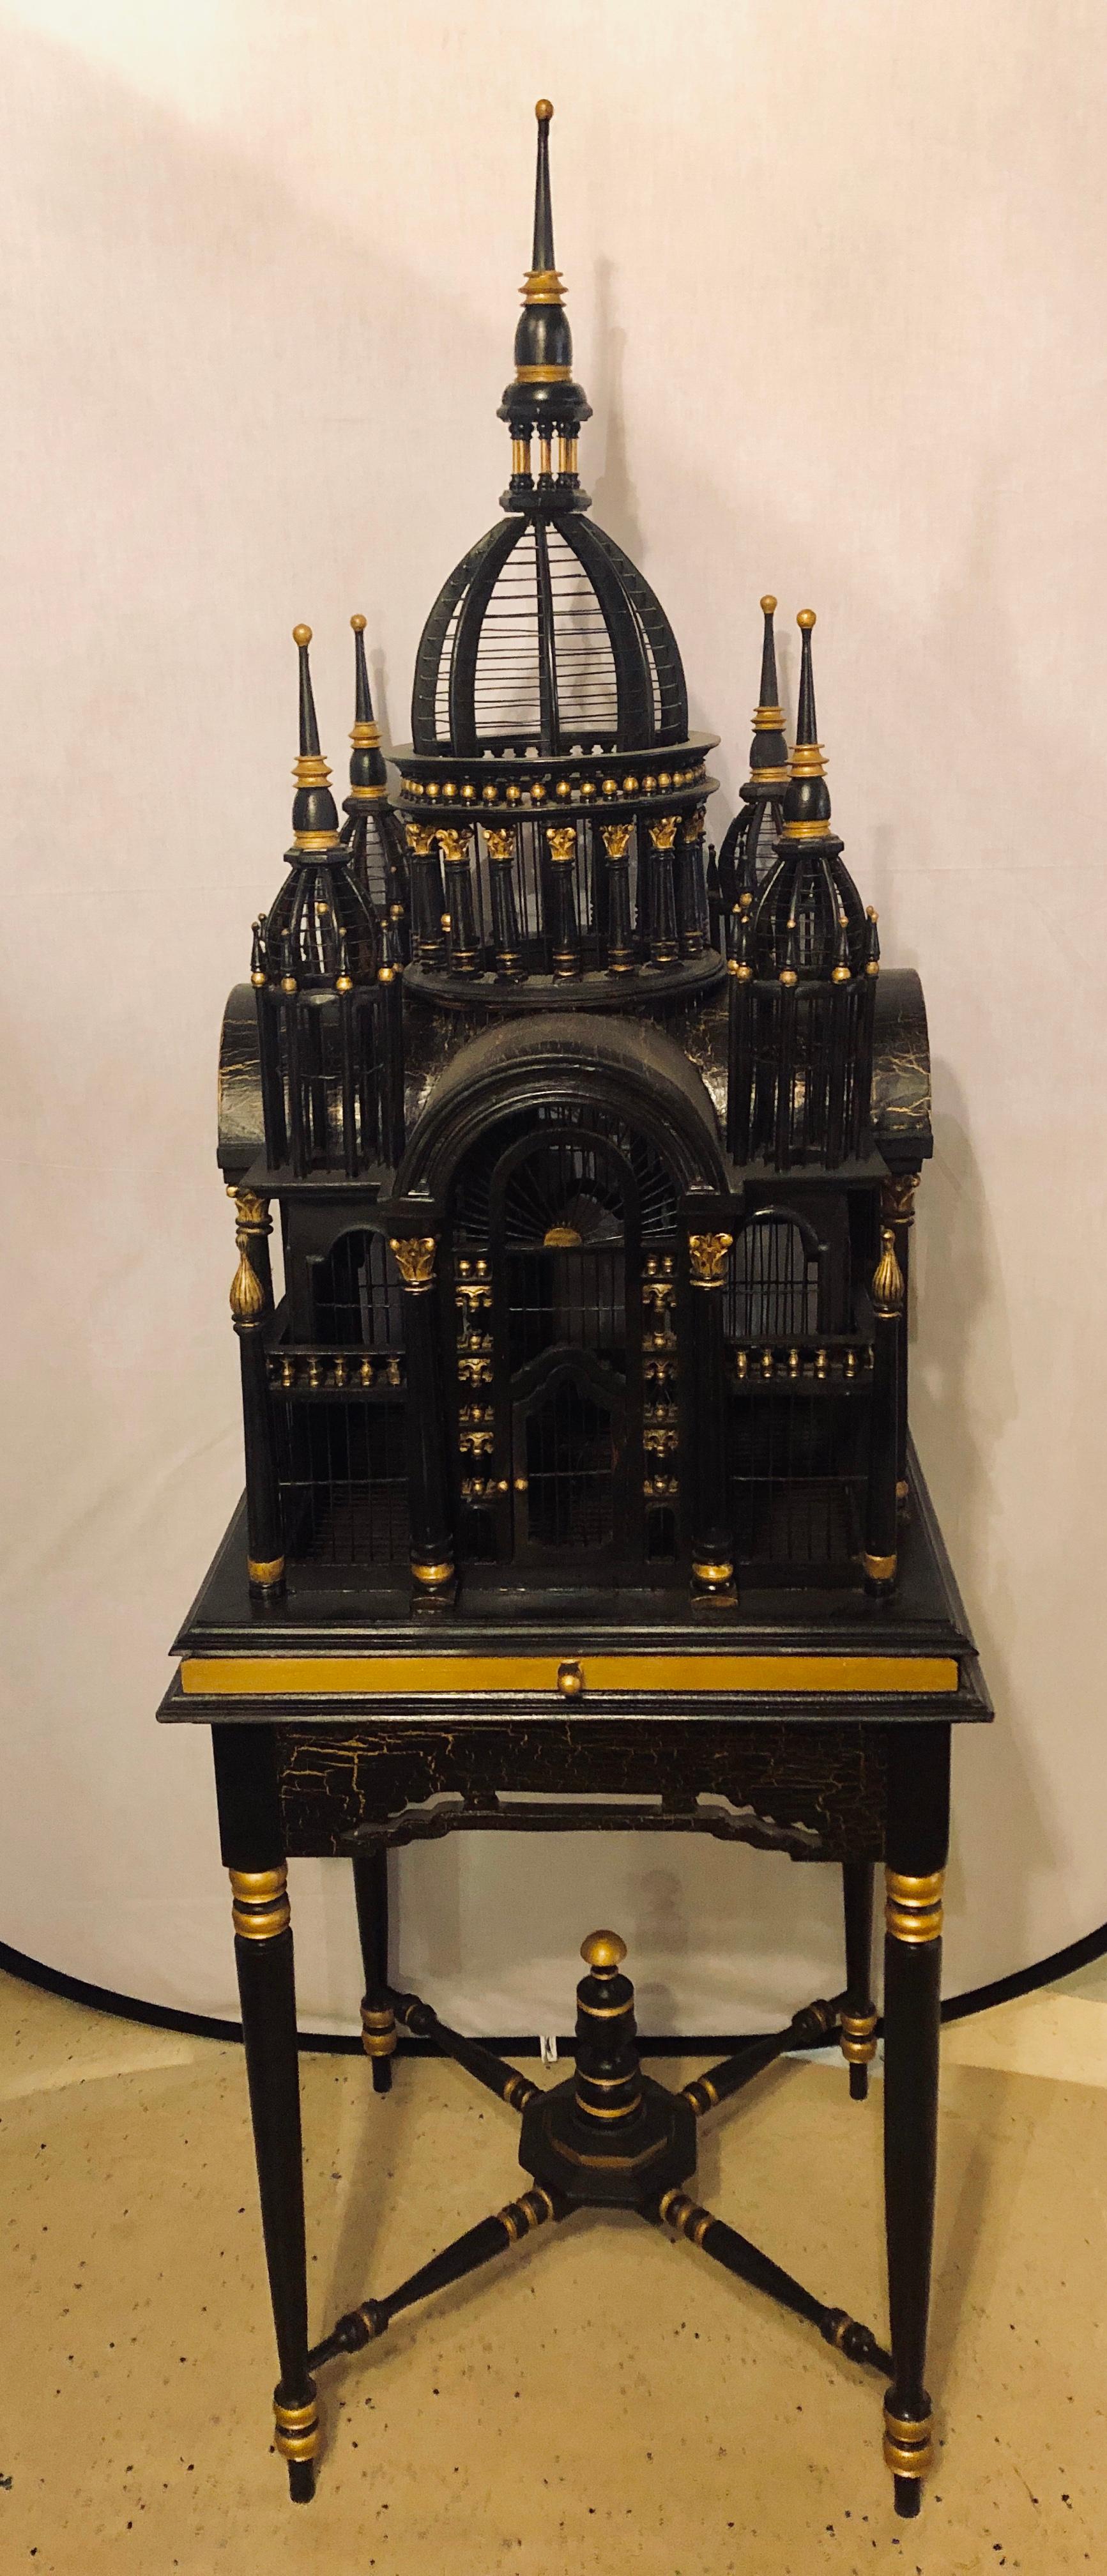 A Victorian ebony and gilt faux marble decorated birdcage on a stand. This functional birdcage has a lower sliding plate to clean the debris and a wide upon interior to allow room for a large bird. The top cage area removed from the lower pedestal